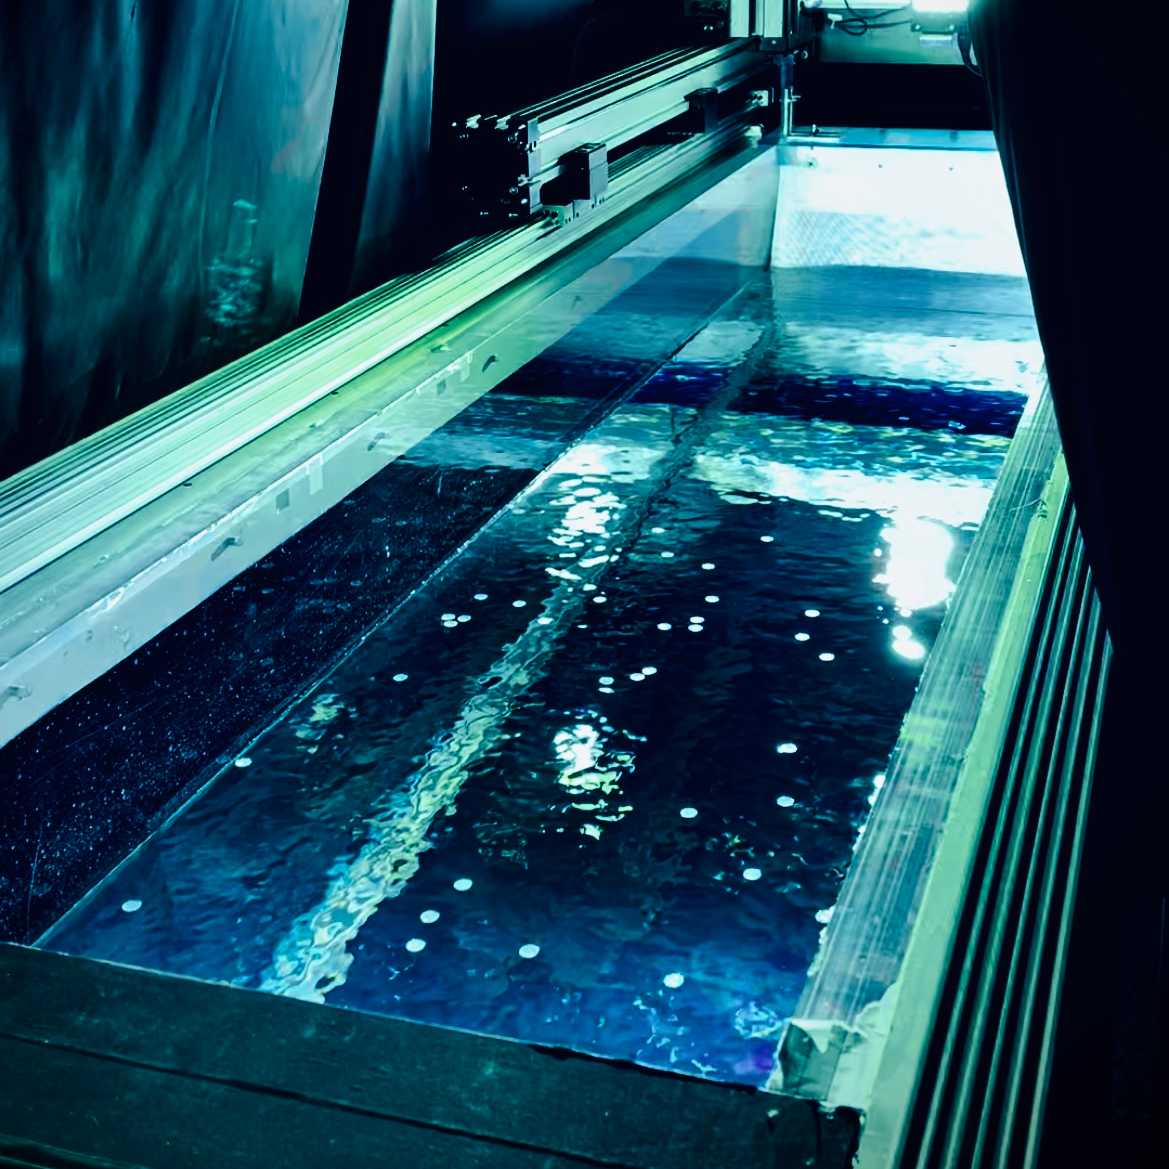 Enlarged view: Water flume with floating particles